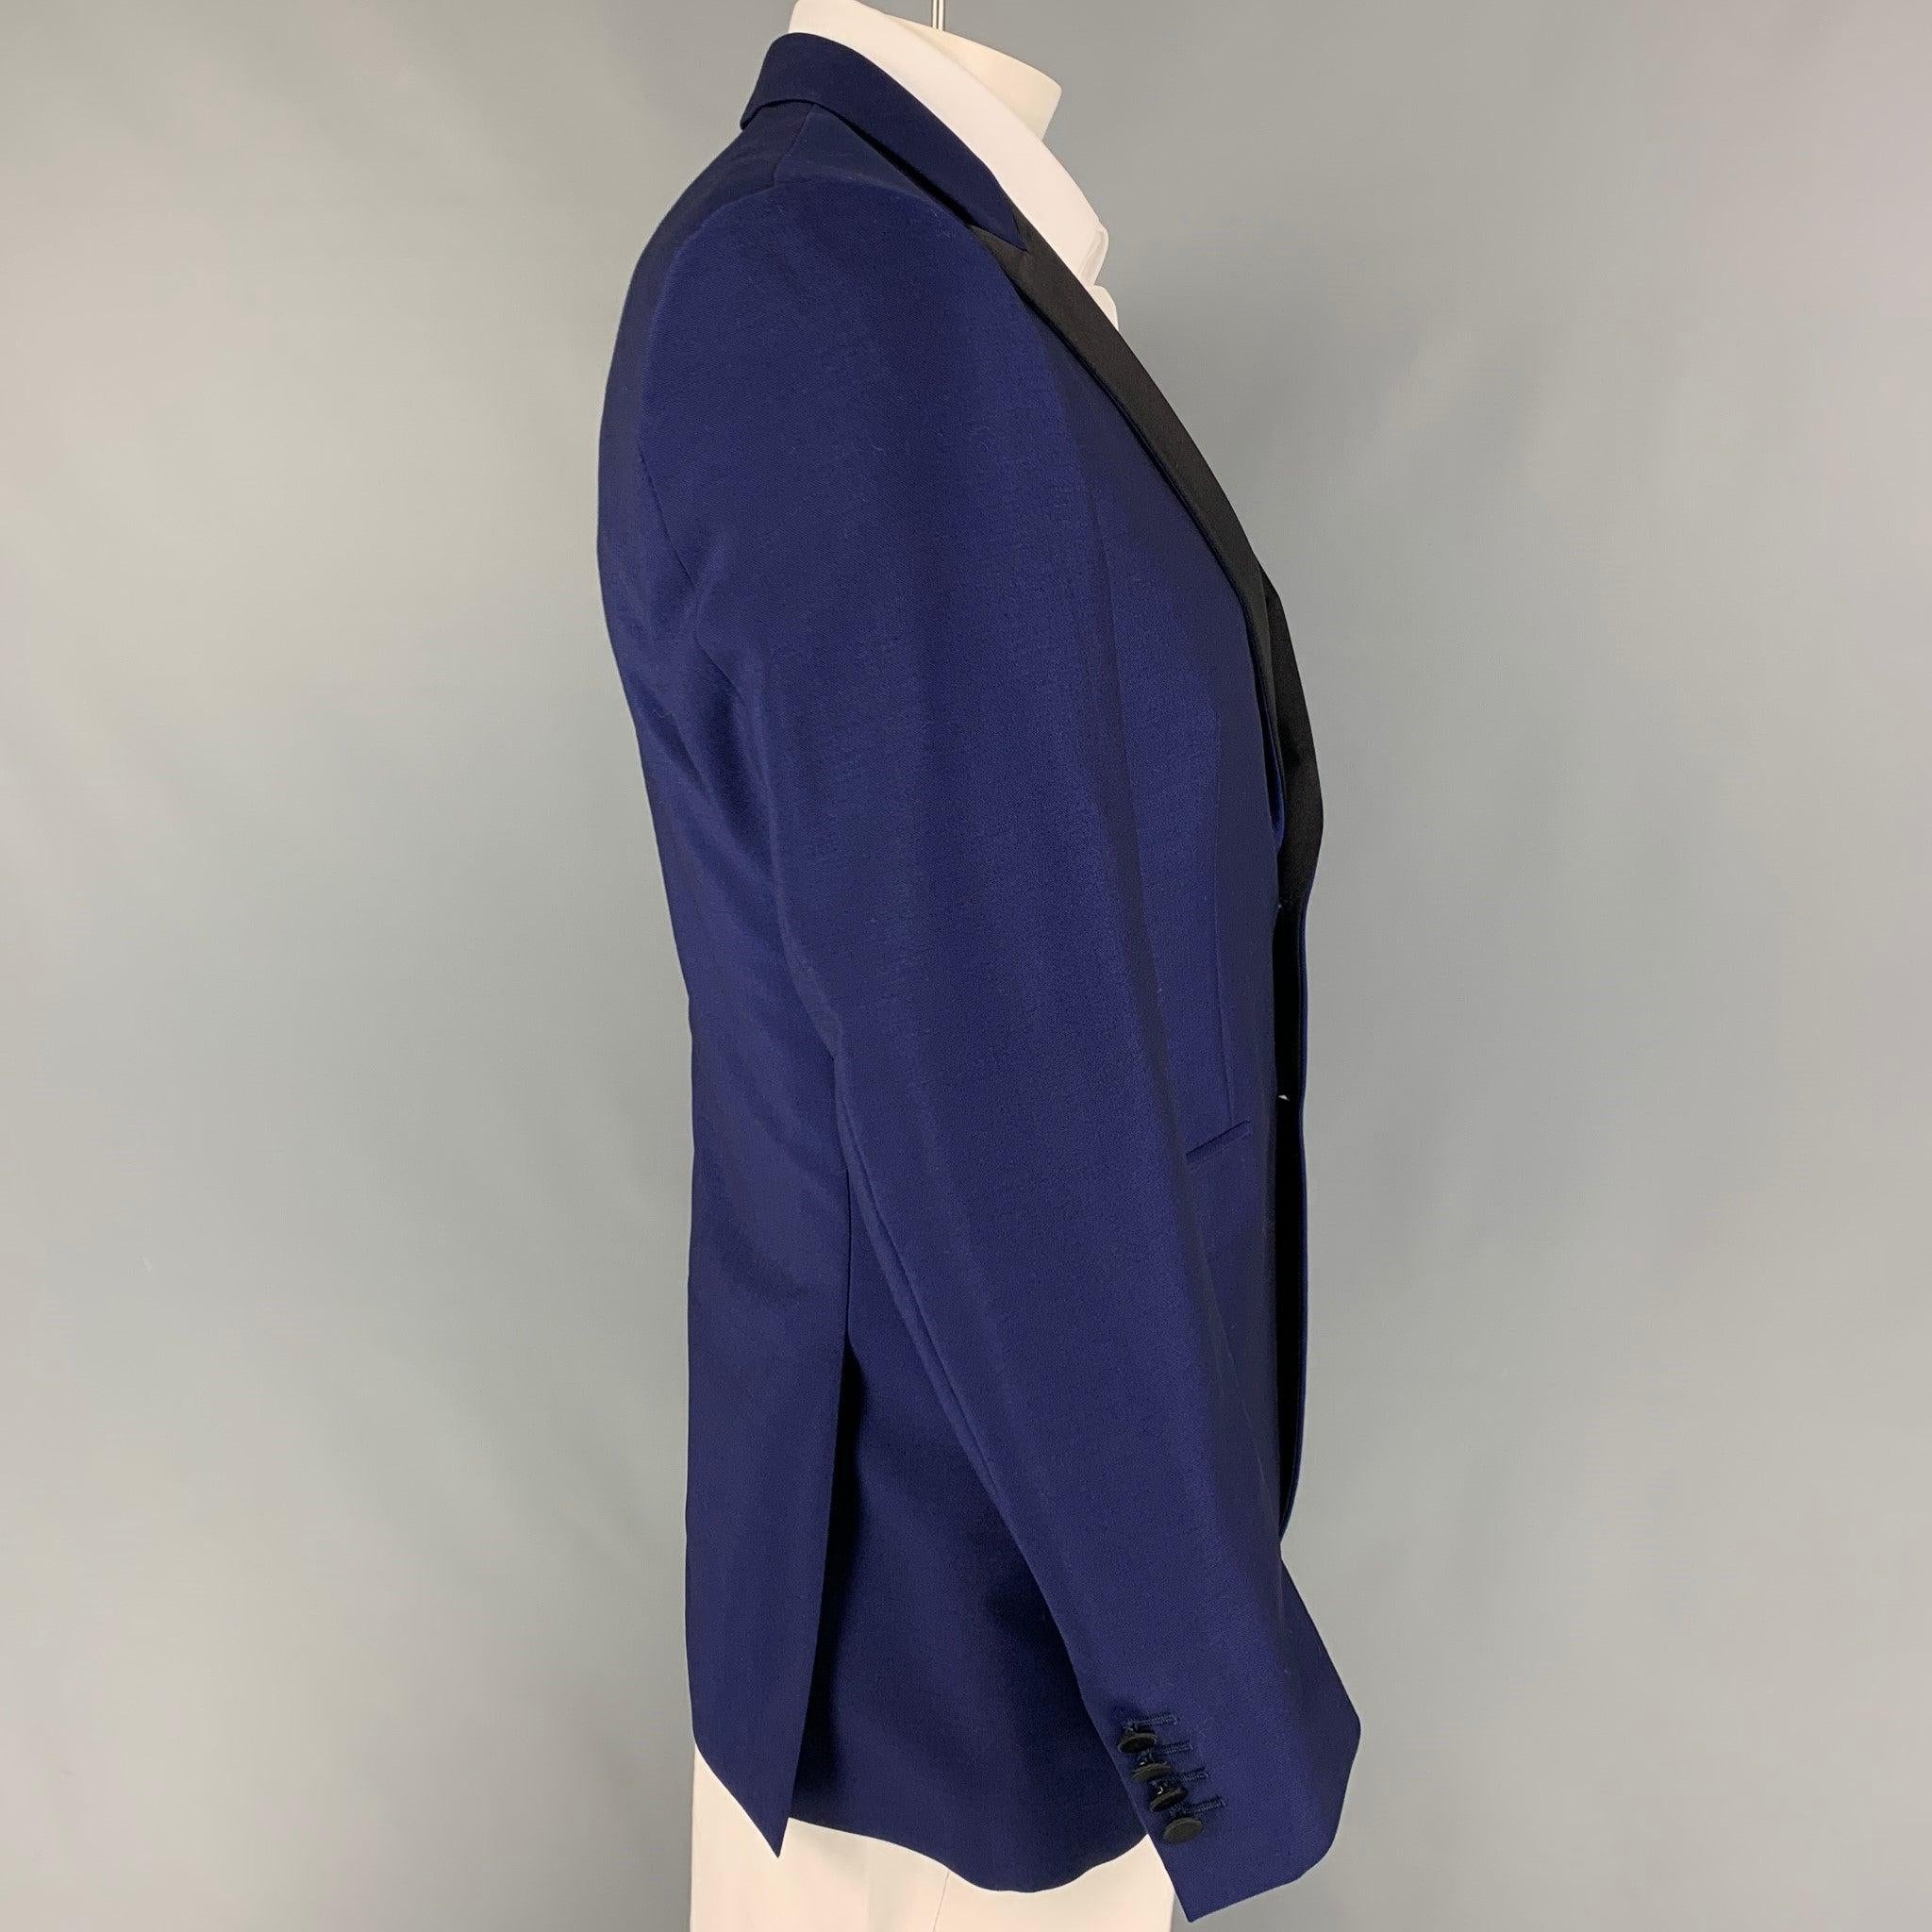 BURBERRY LONDON sport coat comes in a royal blue & black wool with a full liner featuring a peak lapel, flap pockets, double back vent, and a double button closure. Made in Italy.
Excellent
Pre-Owned Condition. 

Marked:   50 R  

Measurements: 
